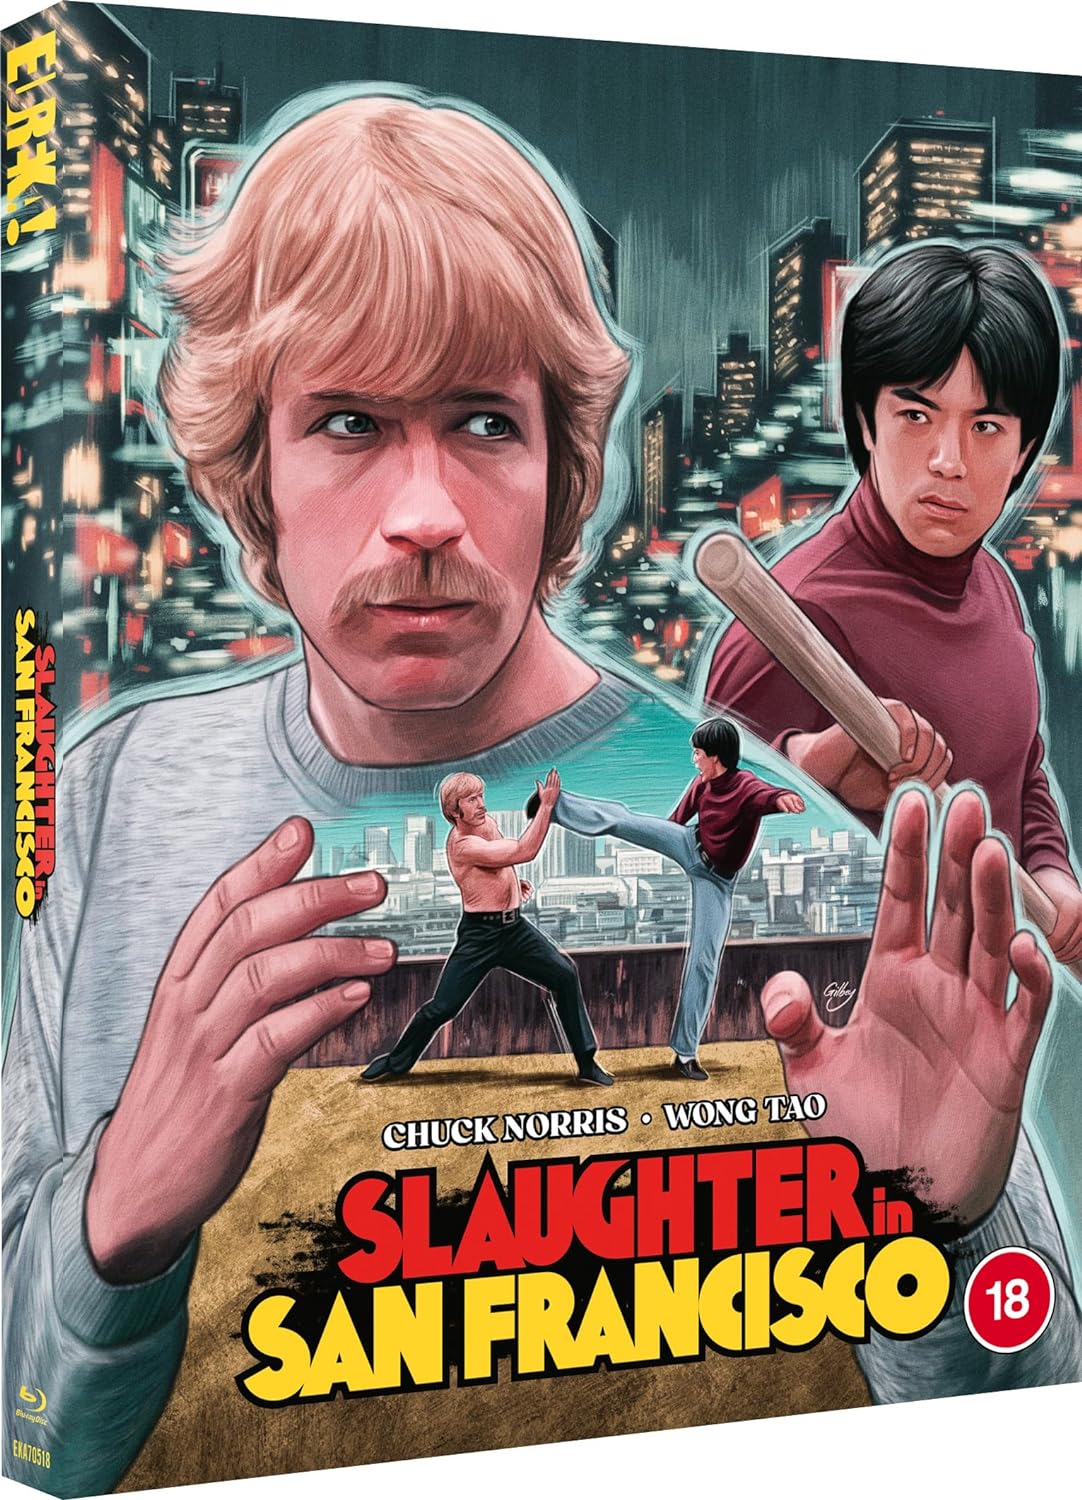 Slaughter In San Francisco Blu-ray with Slipcover (Eureka/Region B)